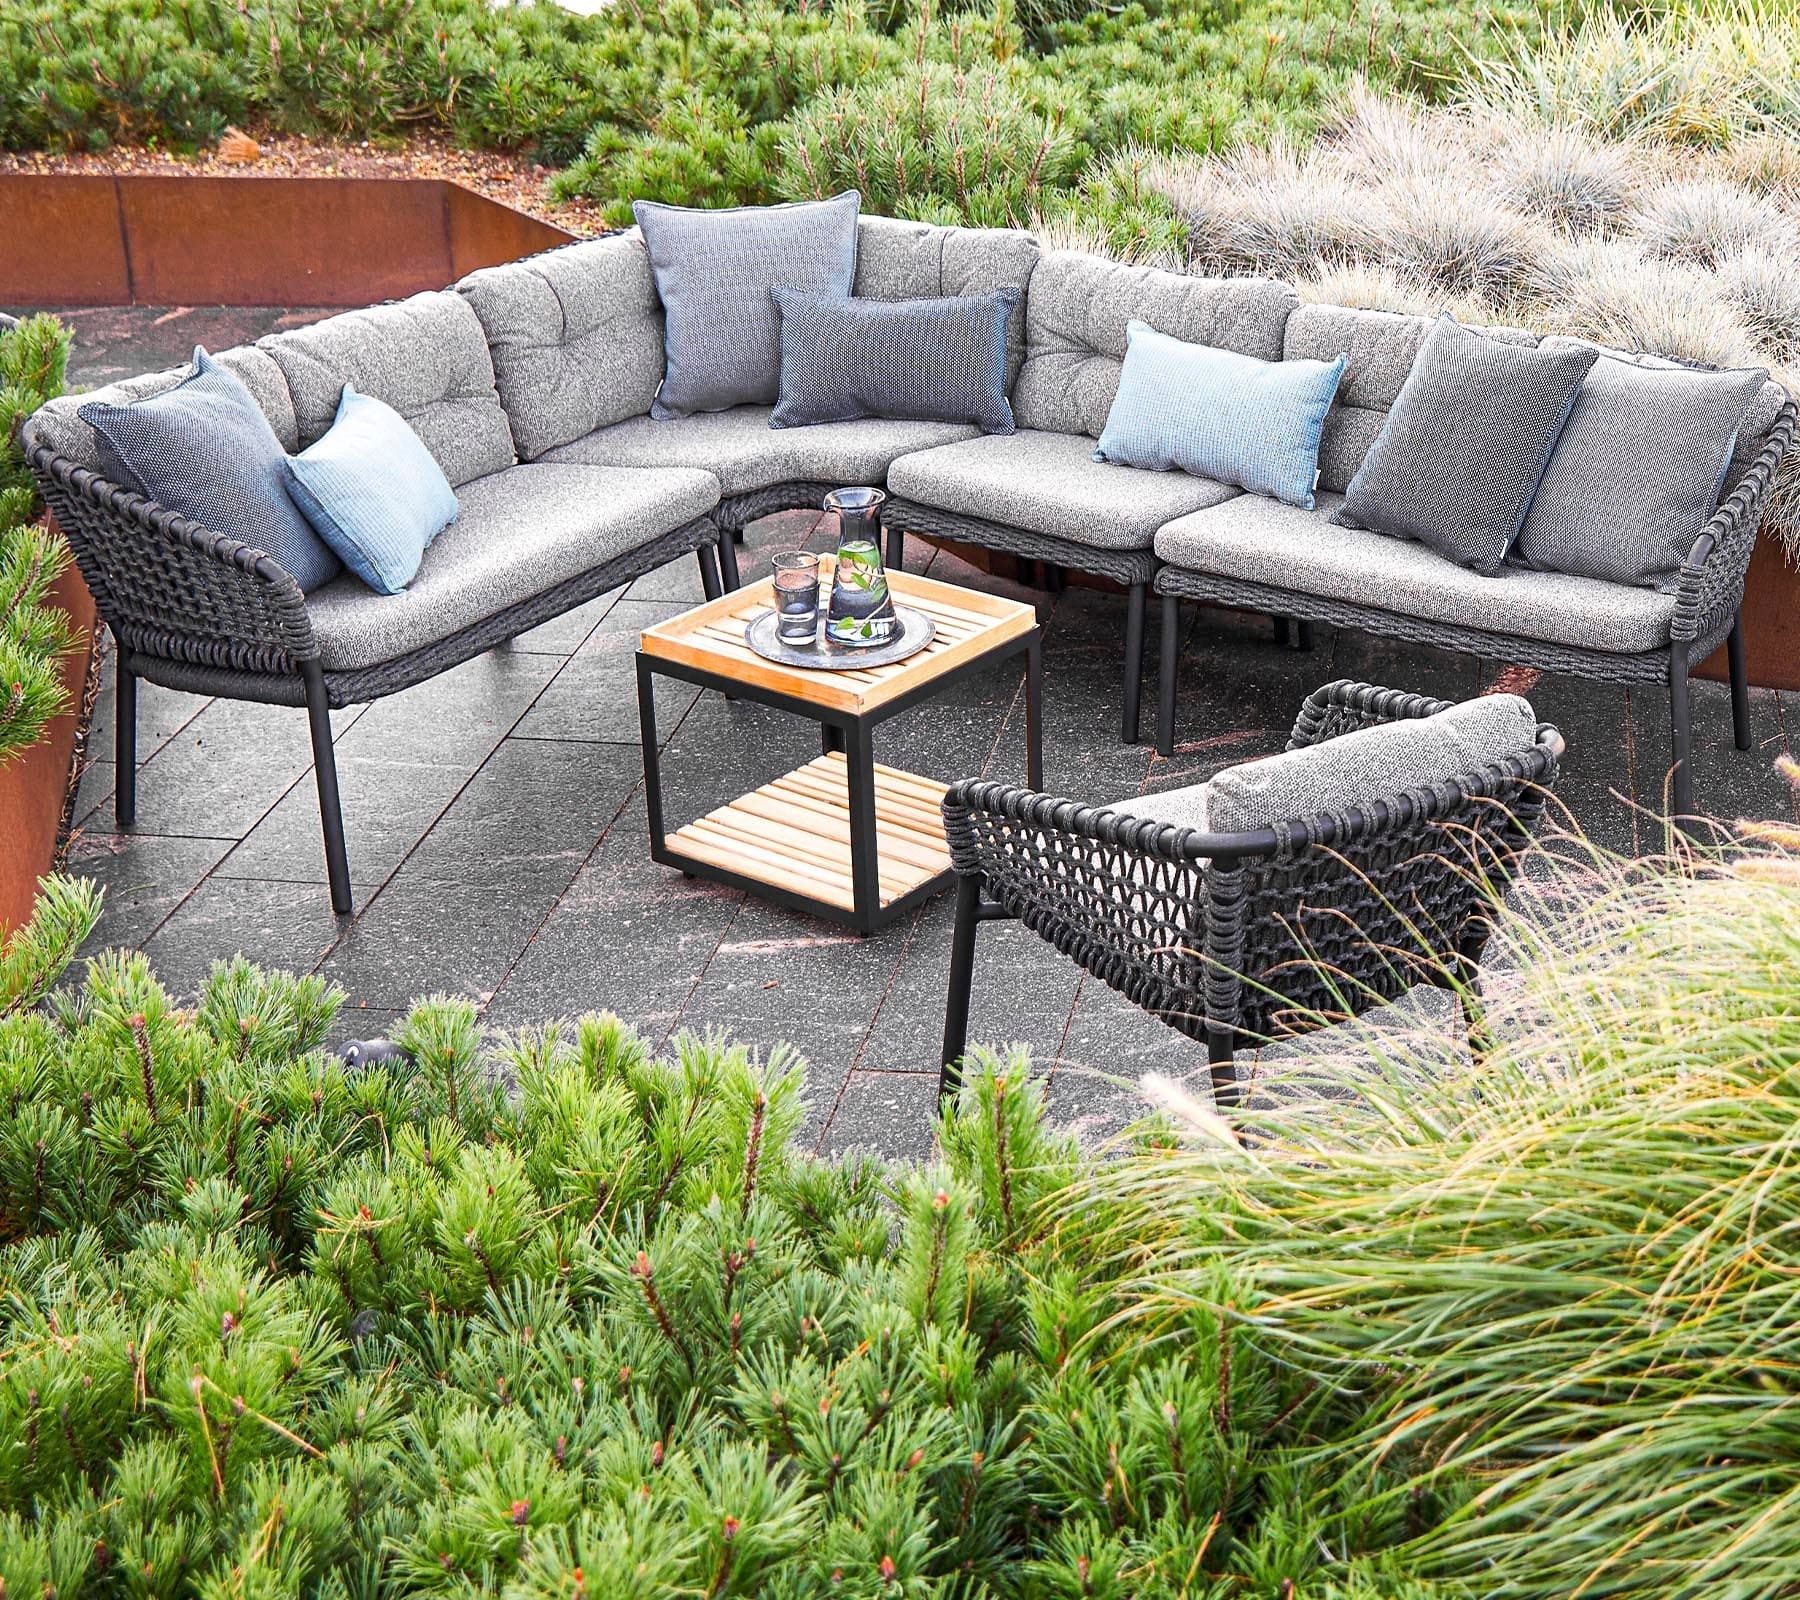 Boxhill's Ocean Outdoor Single Module Sofa lifestyle image with other Ocean Module Sofa and Chair Collection and Level Coffee Table with Teak Top at patio